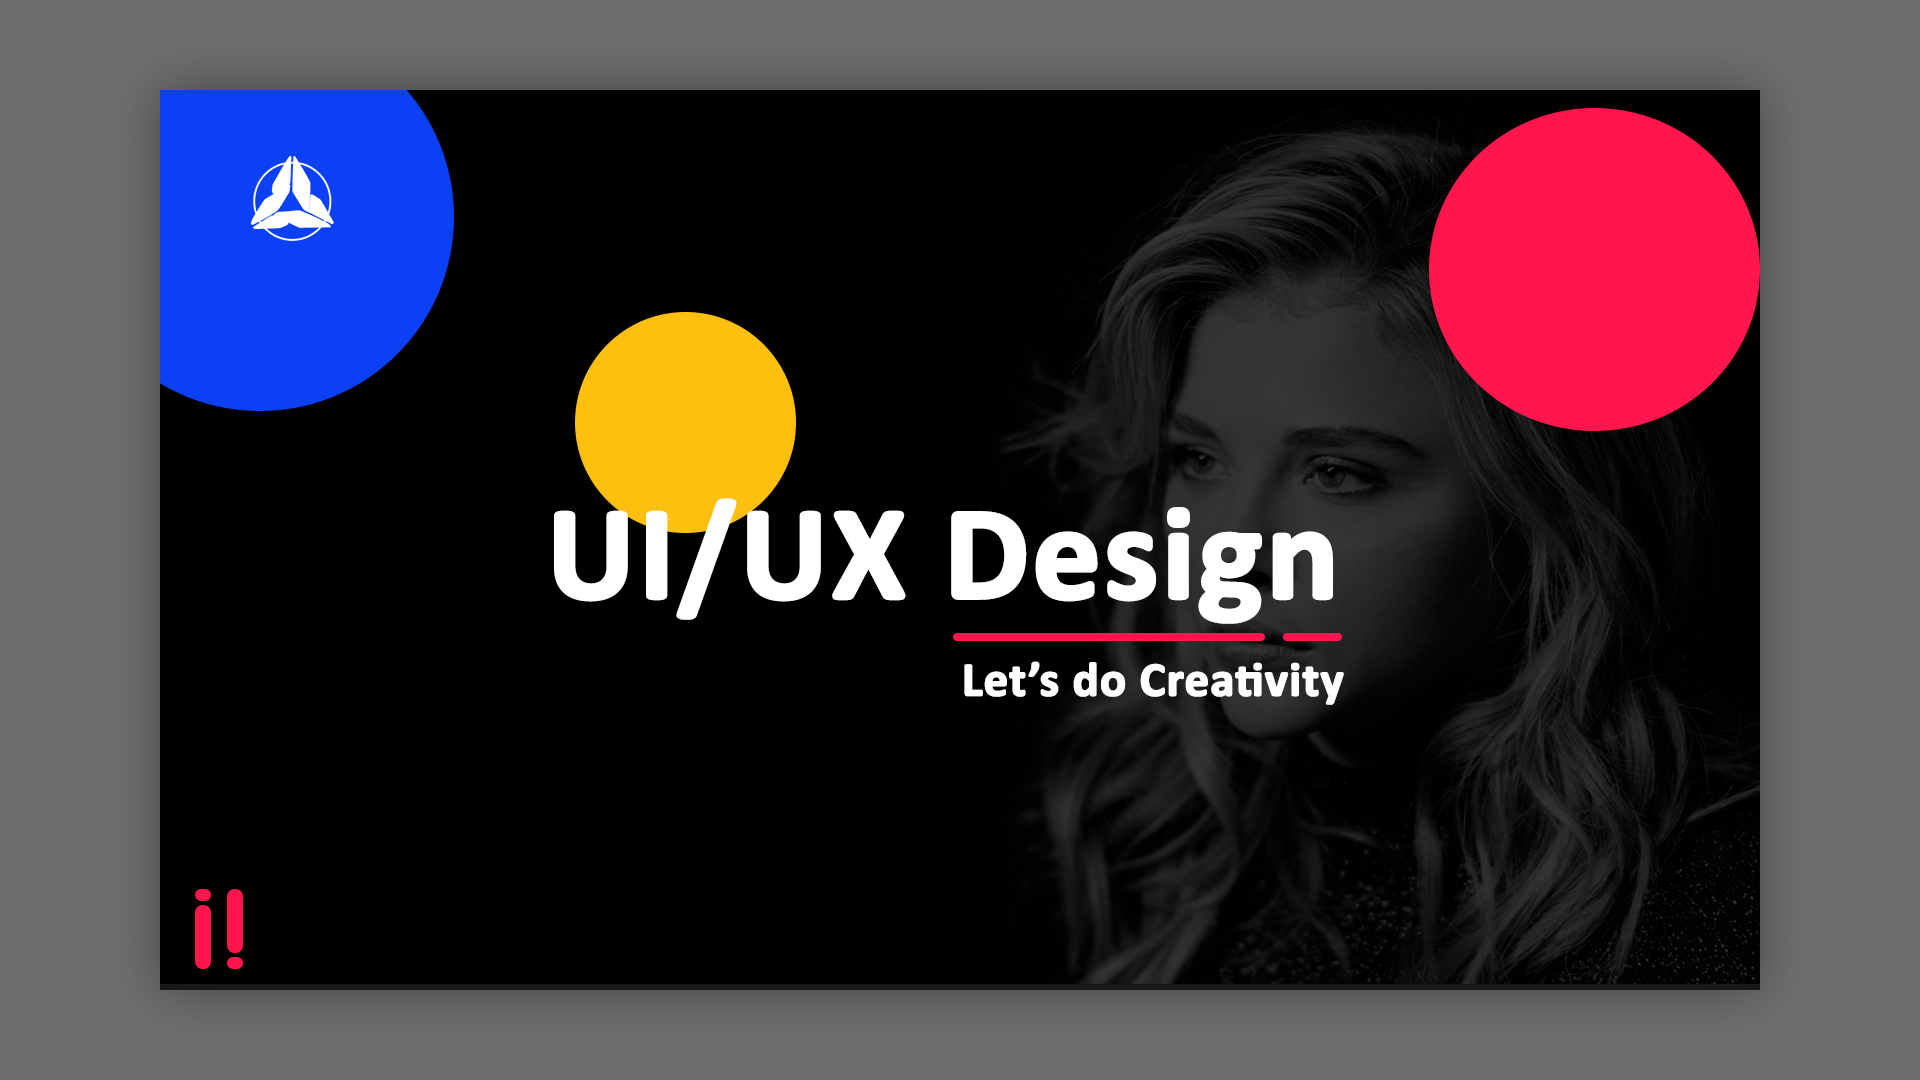 What makes Ux design different from UI